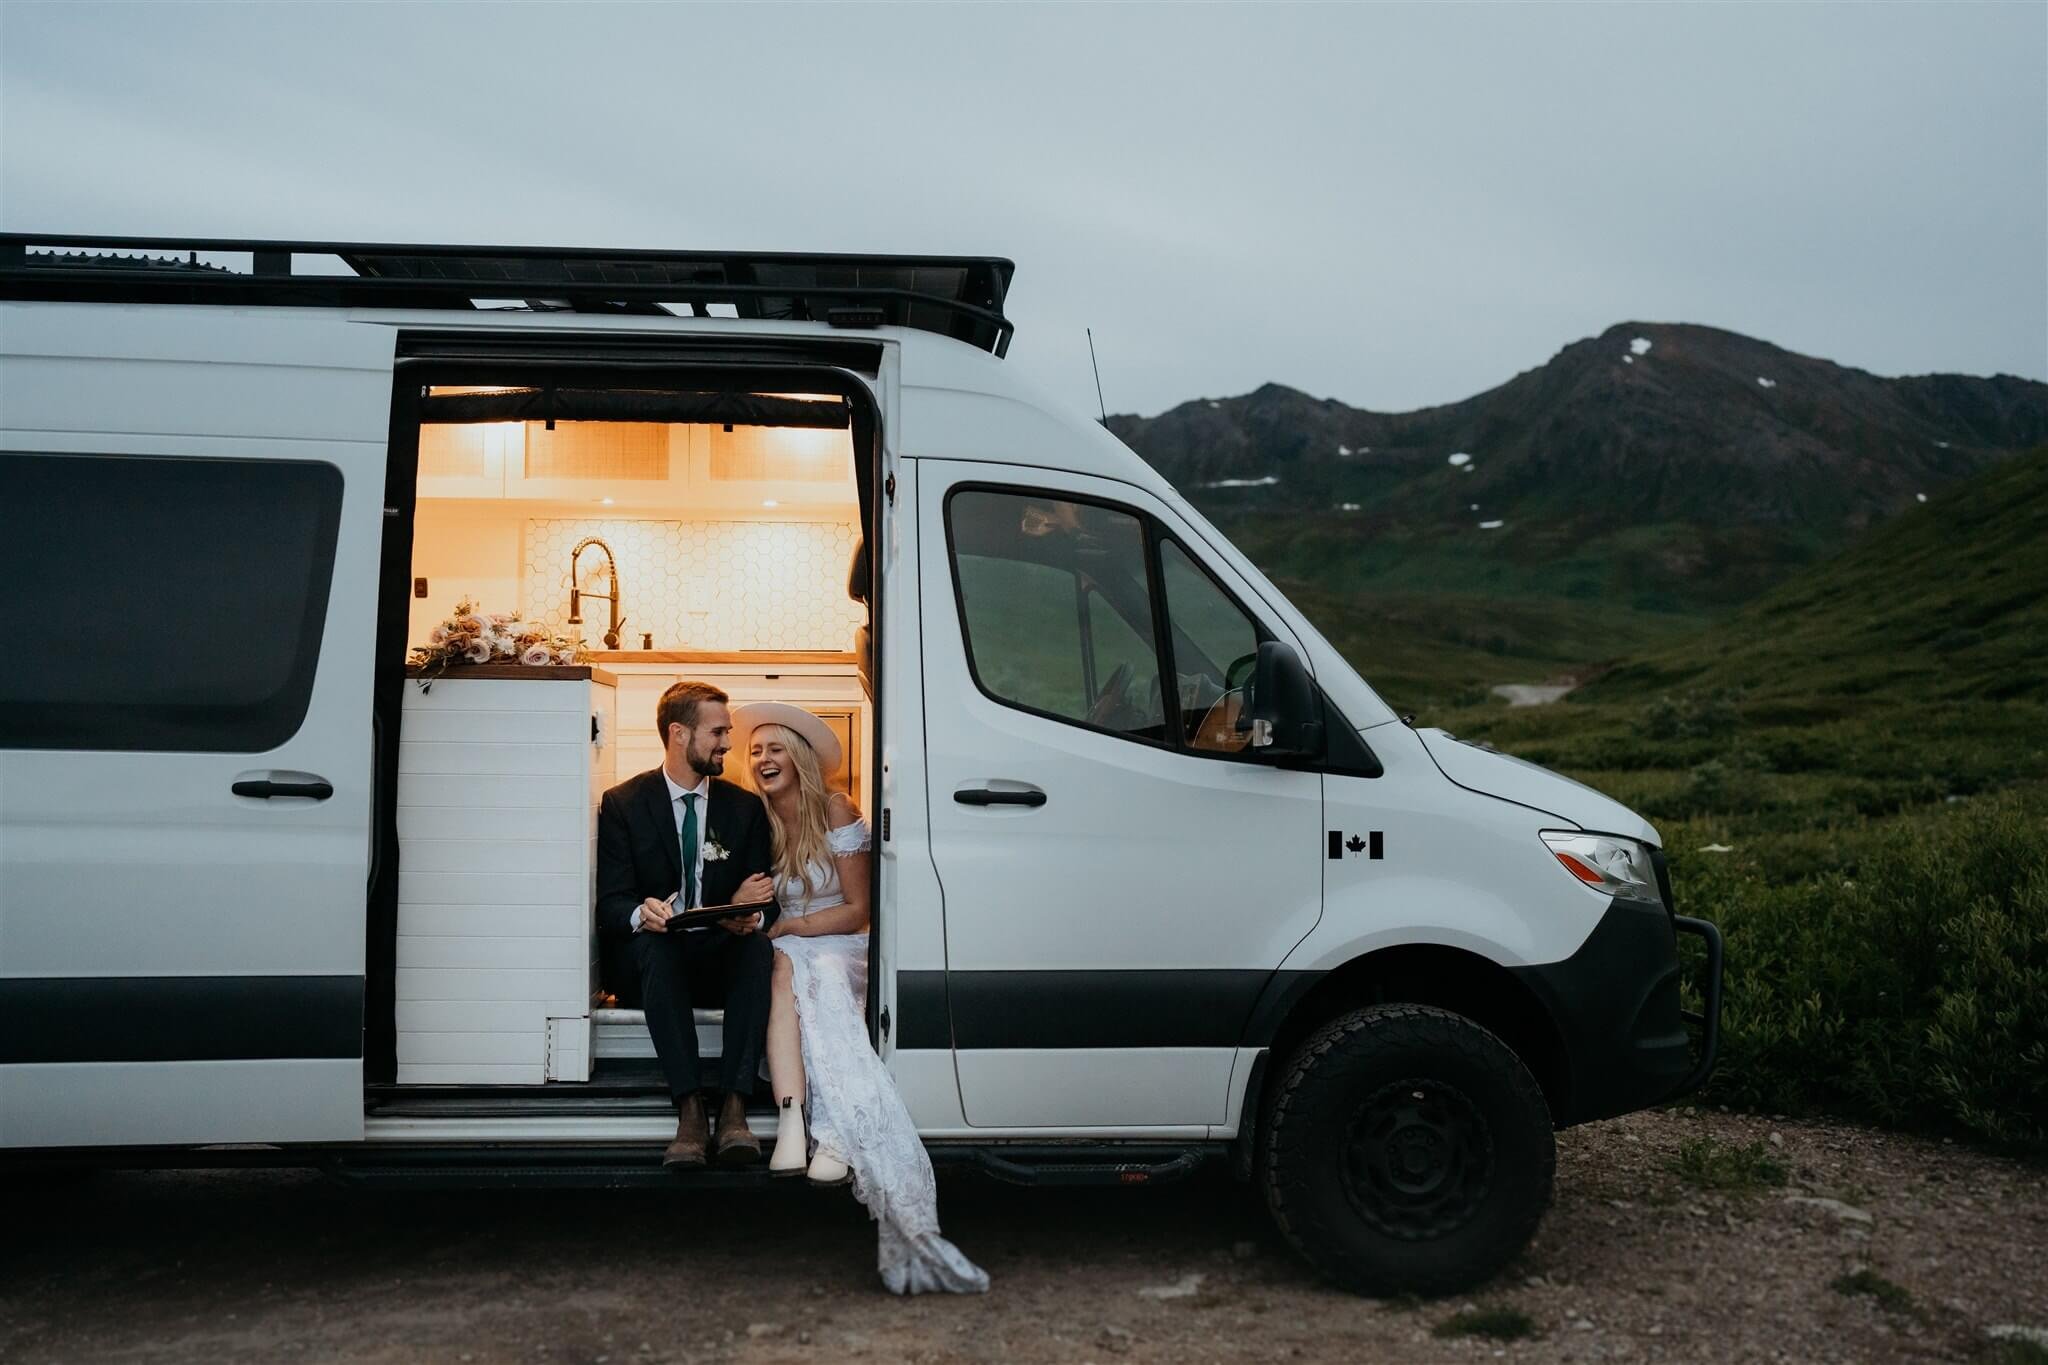 Bride and groom sign marriage license in their camper van after Alaska helicopter elopement